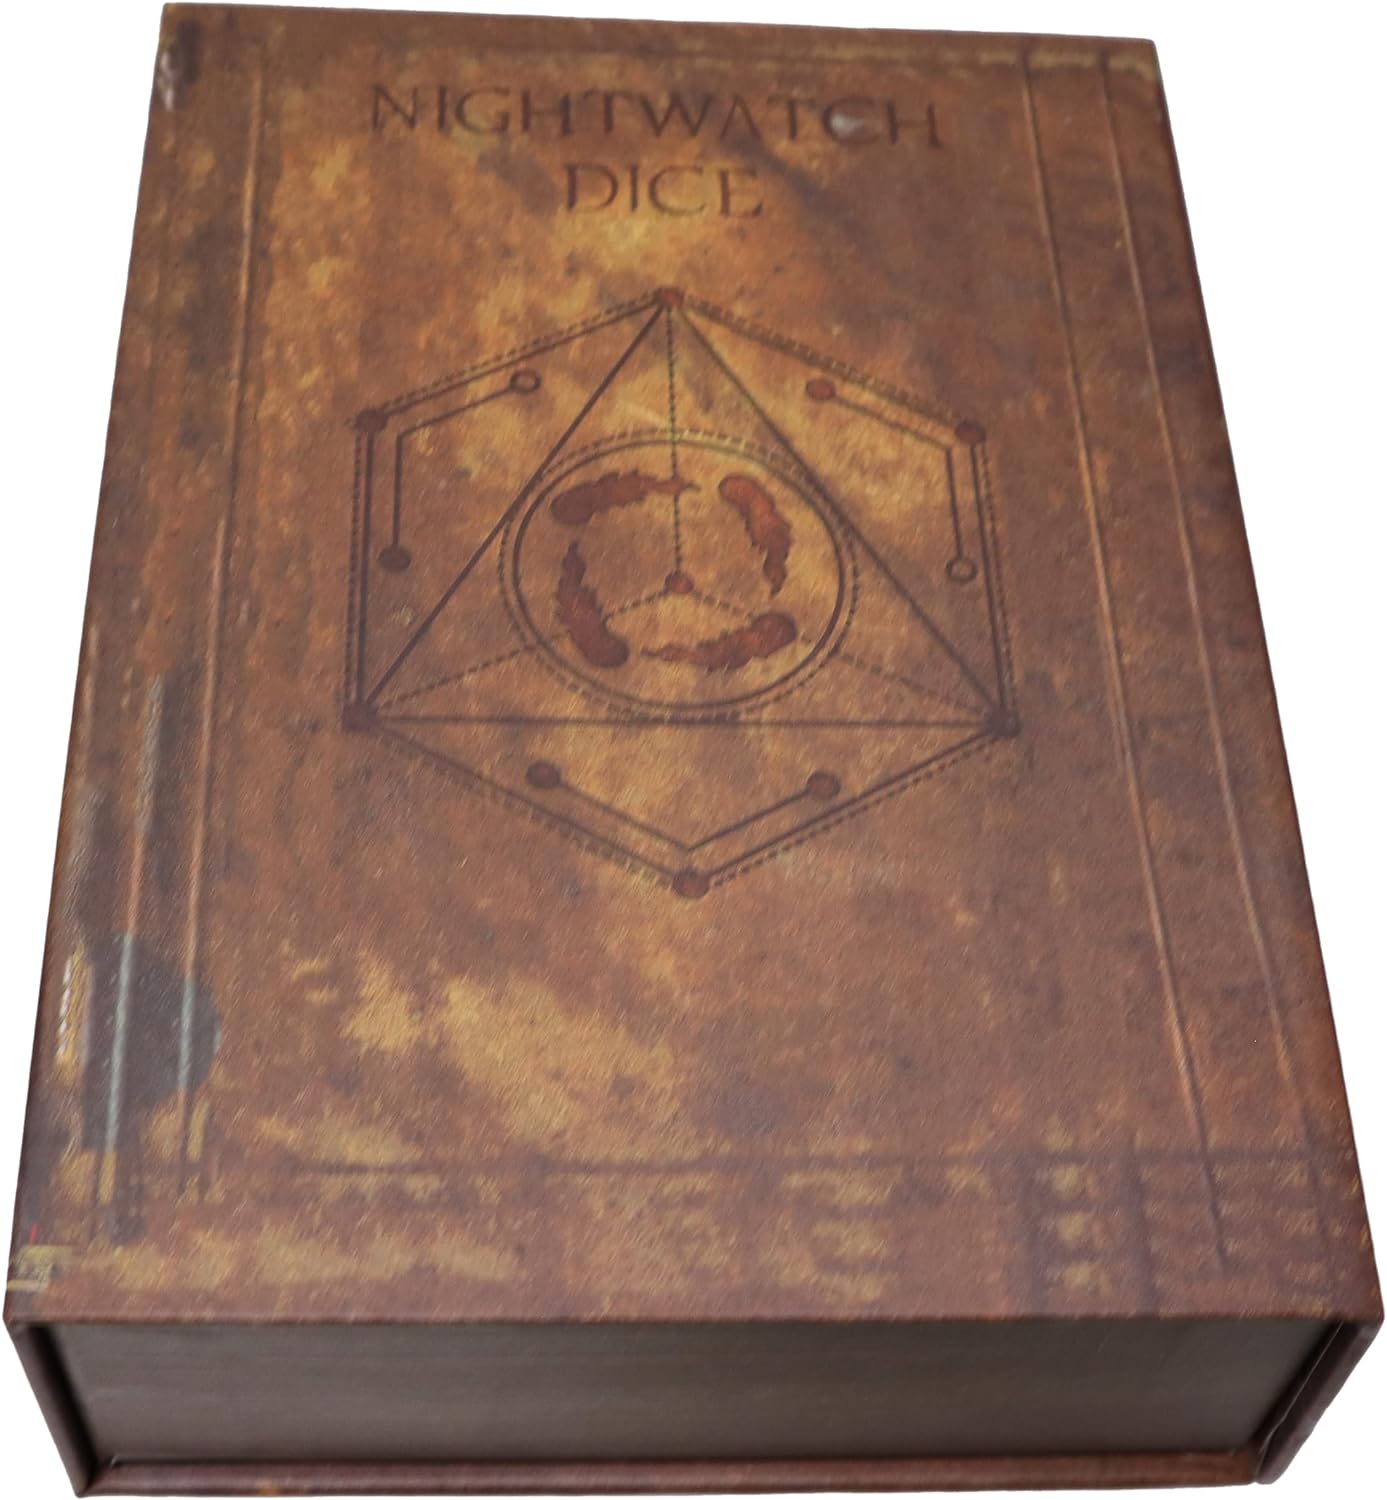 DnD Spellbook Dice Box & Dice Tray - First Edition